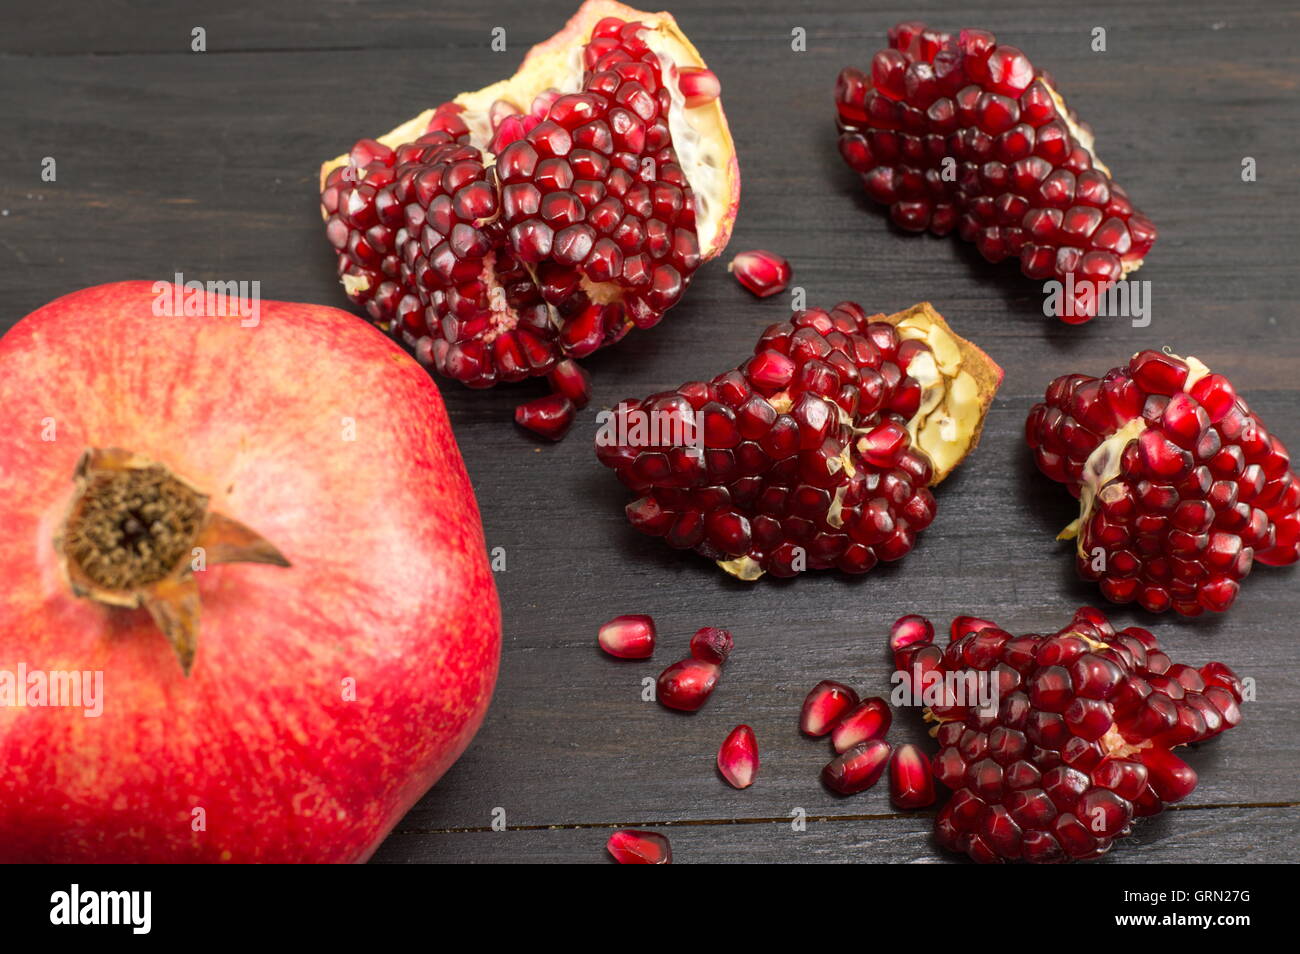 Juicy whole pomegranate and its seeds on white background Stock Photo